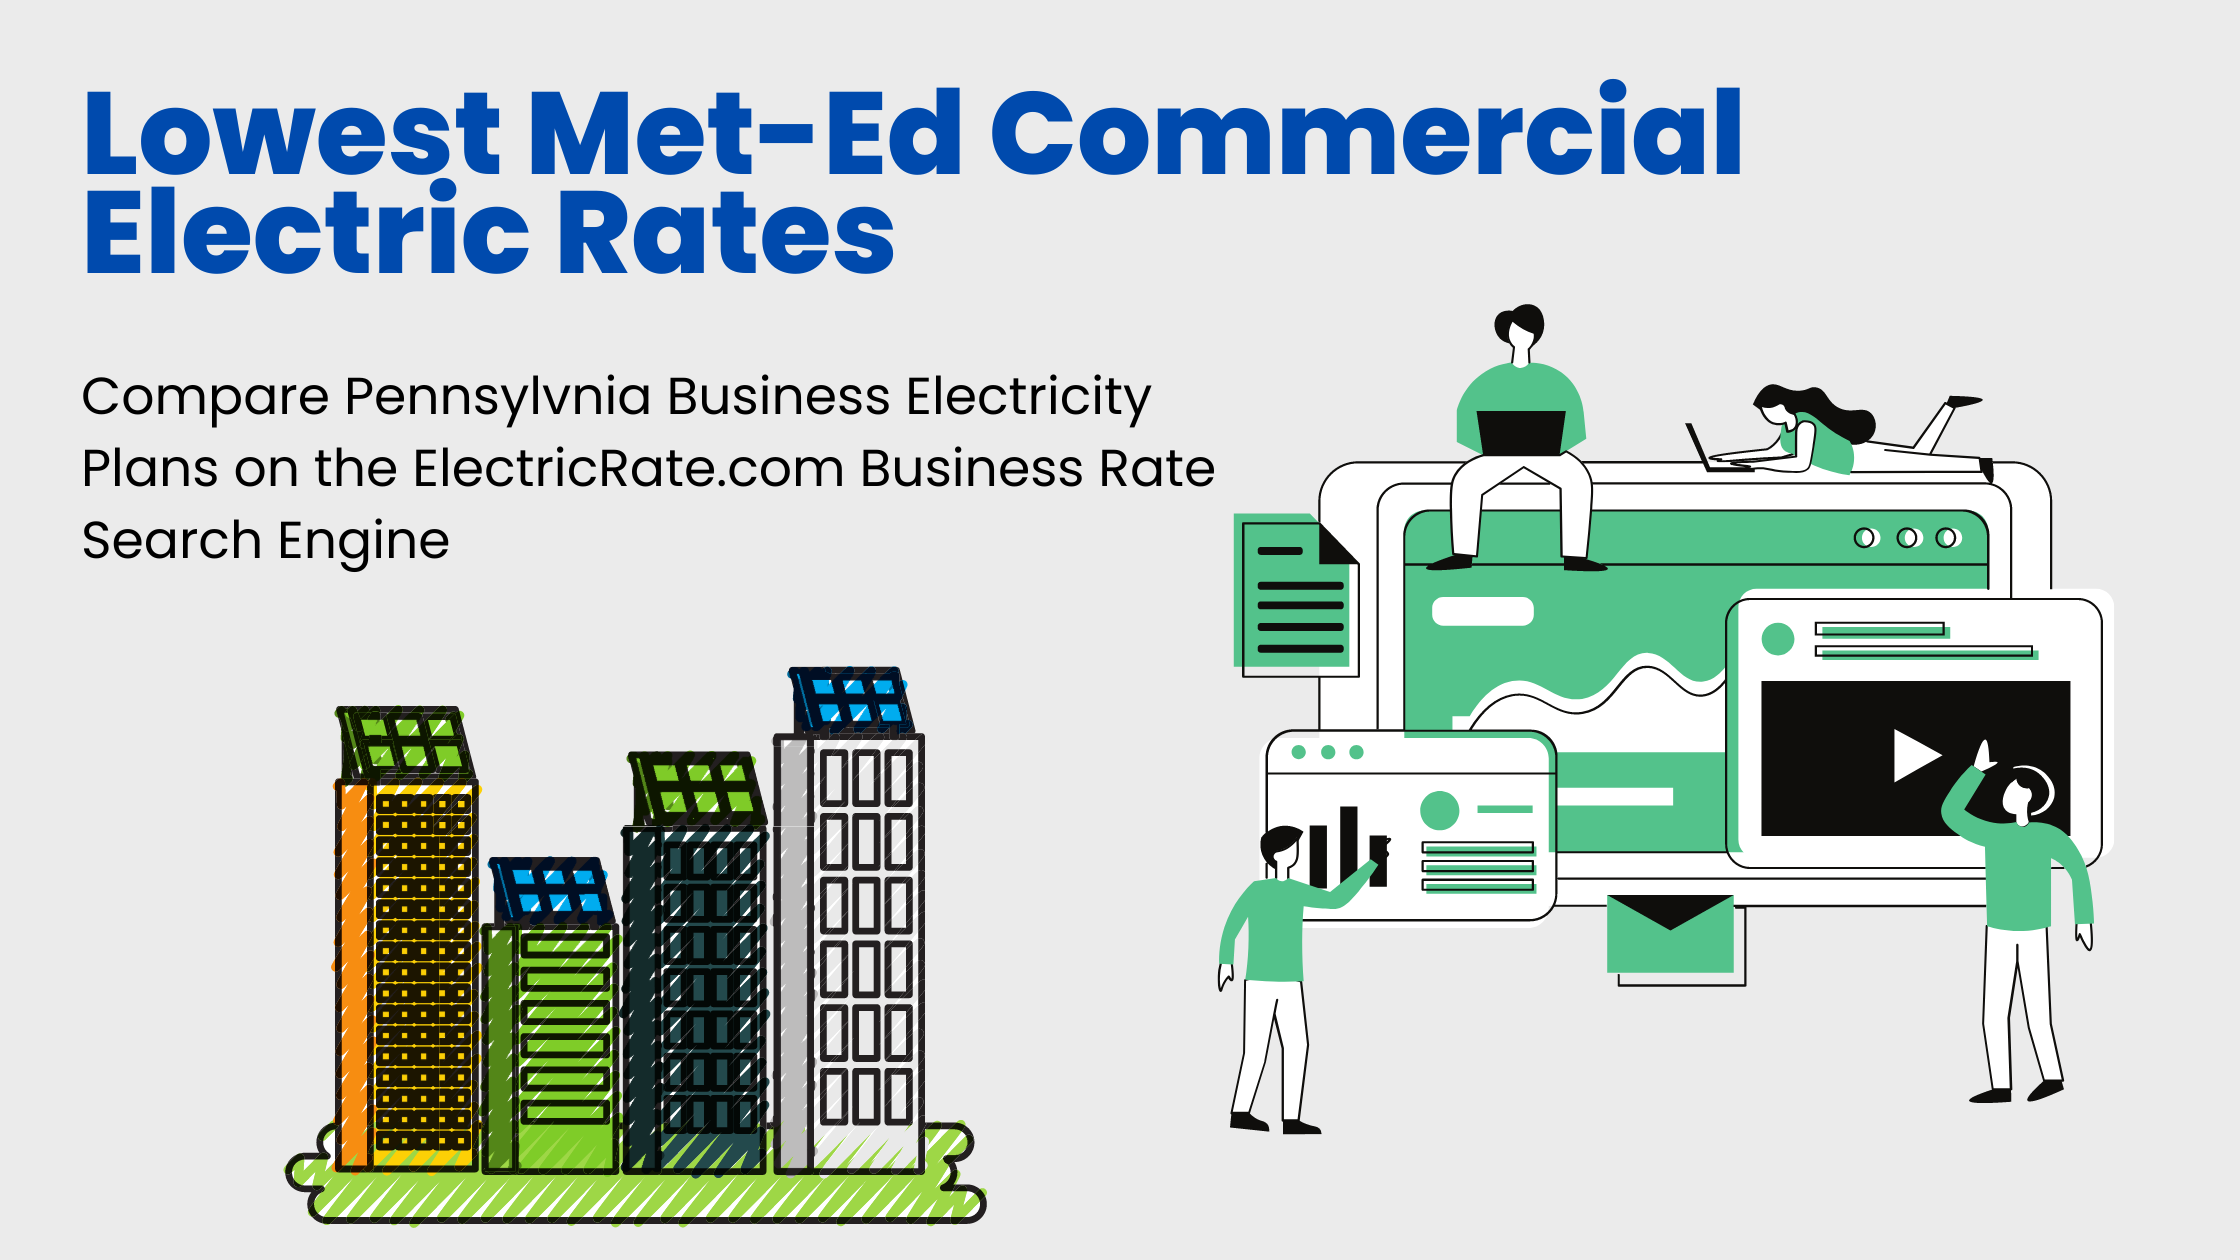 Business owners shopping for the lowest Met-Ed commercial electric rate plans